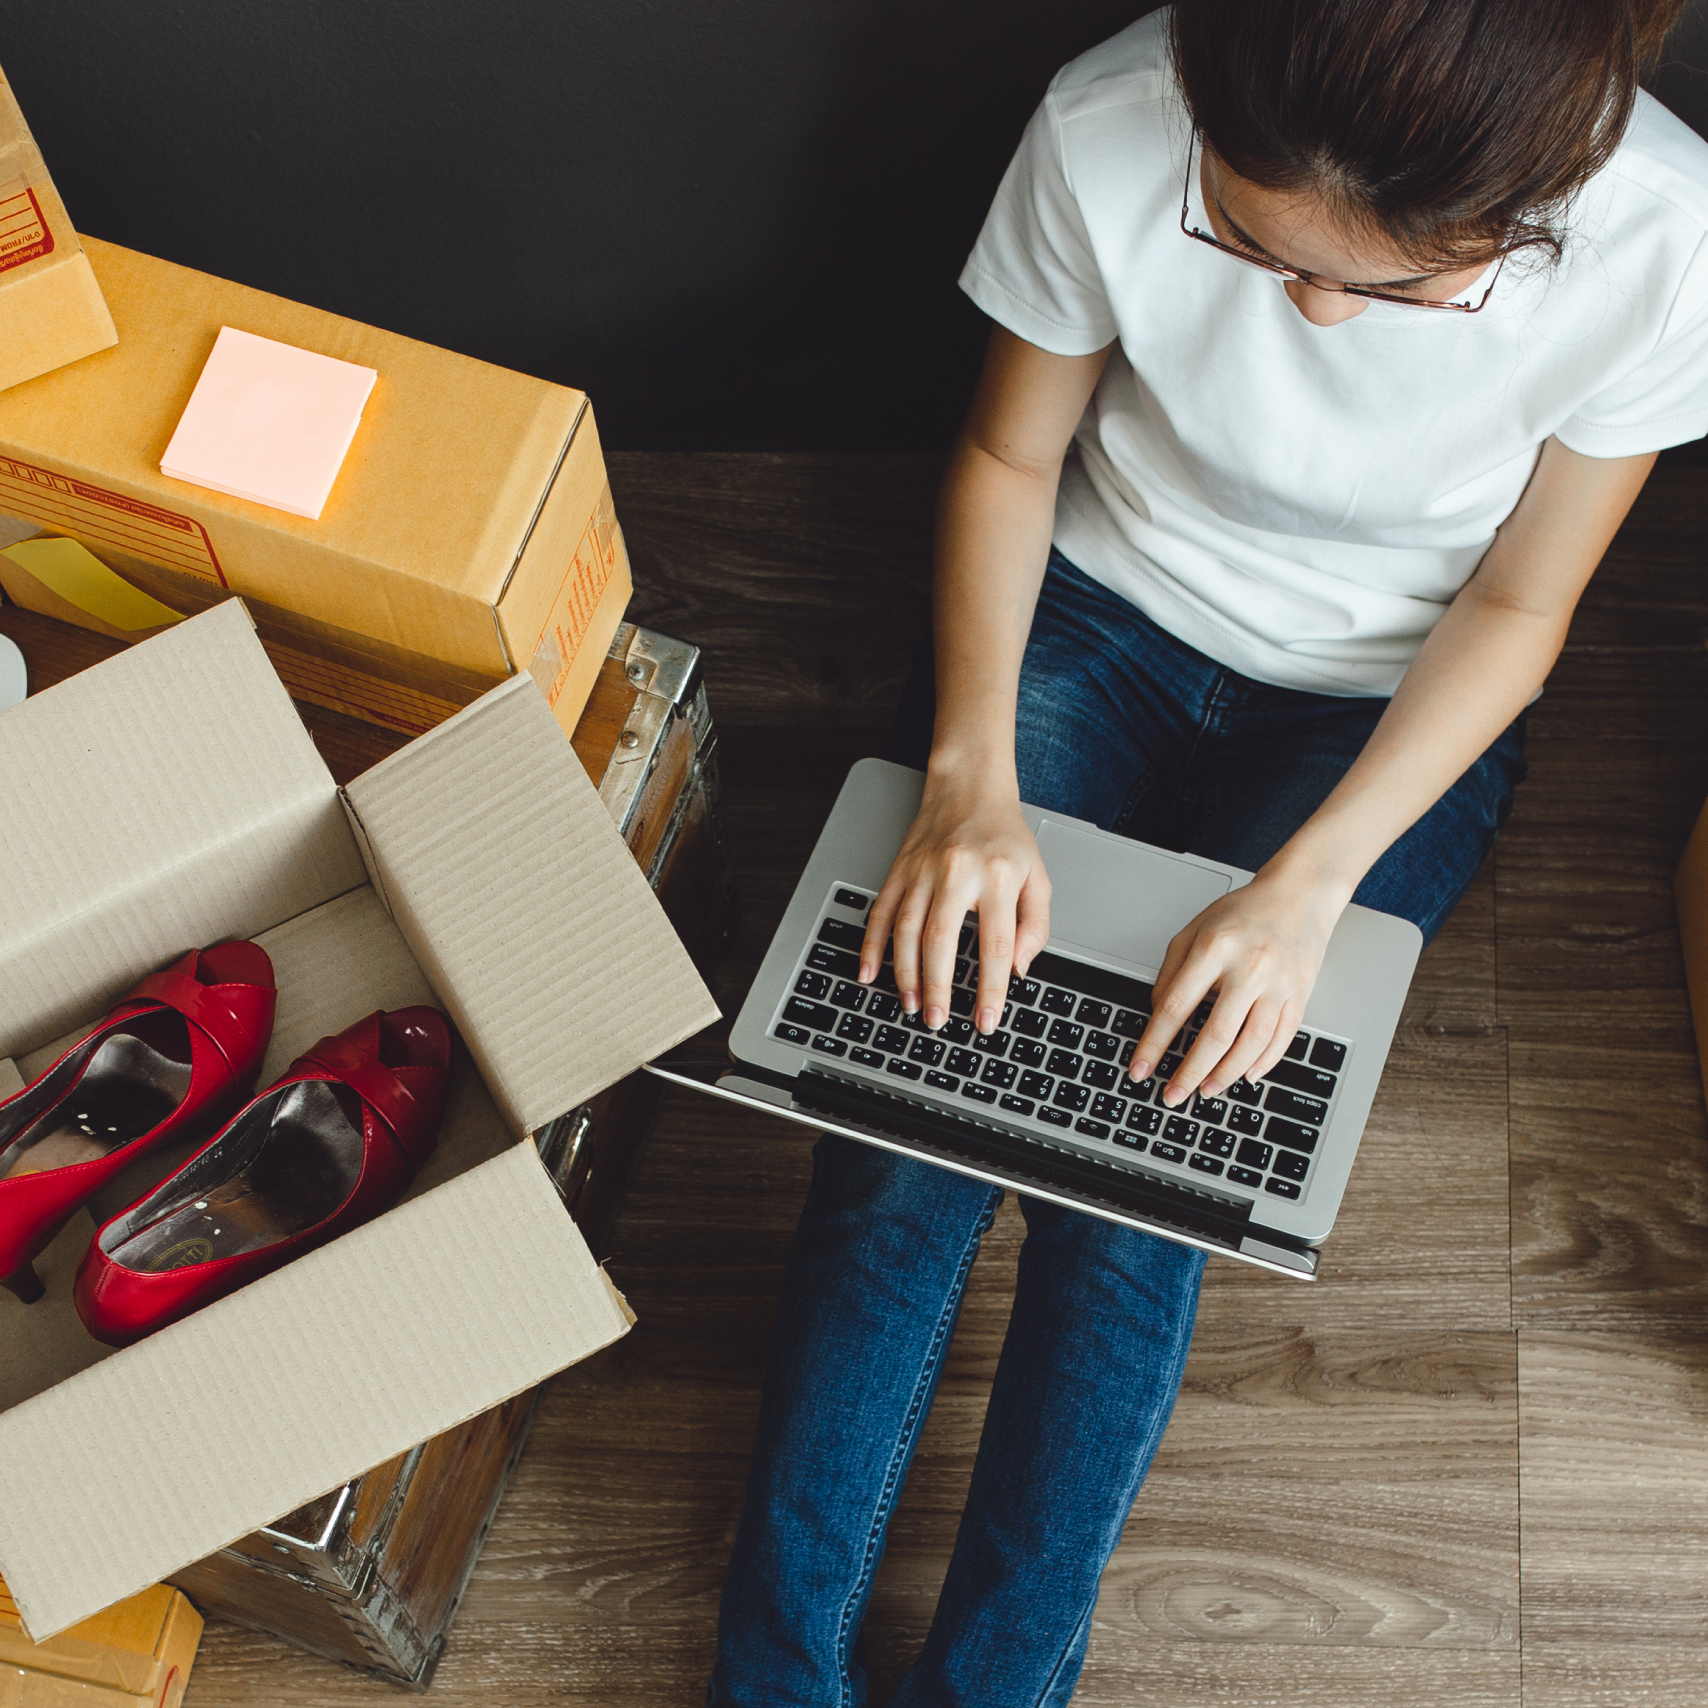 woman online shopping at home surrounded by parcels